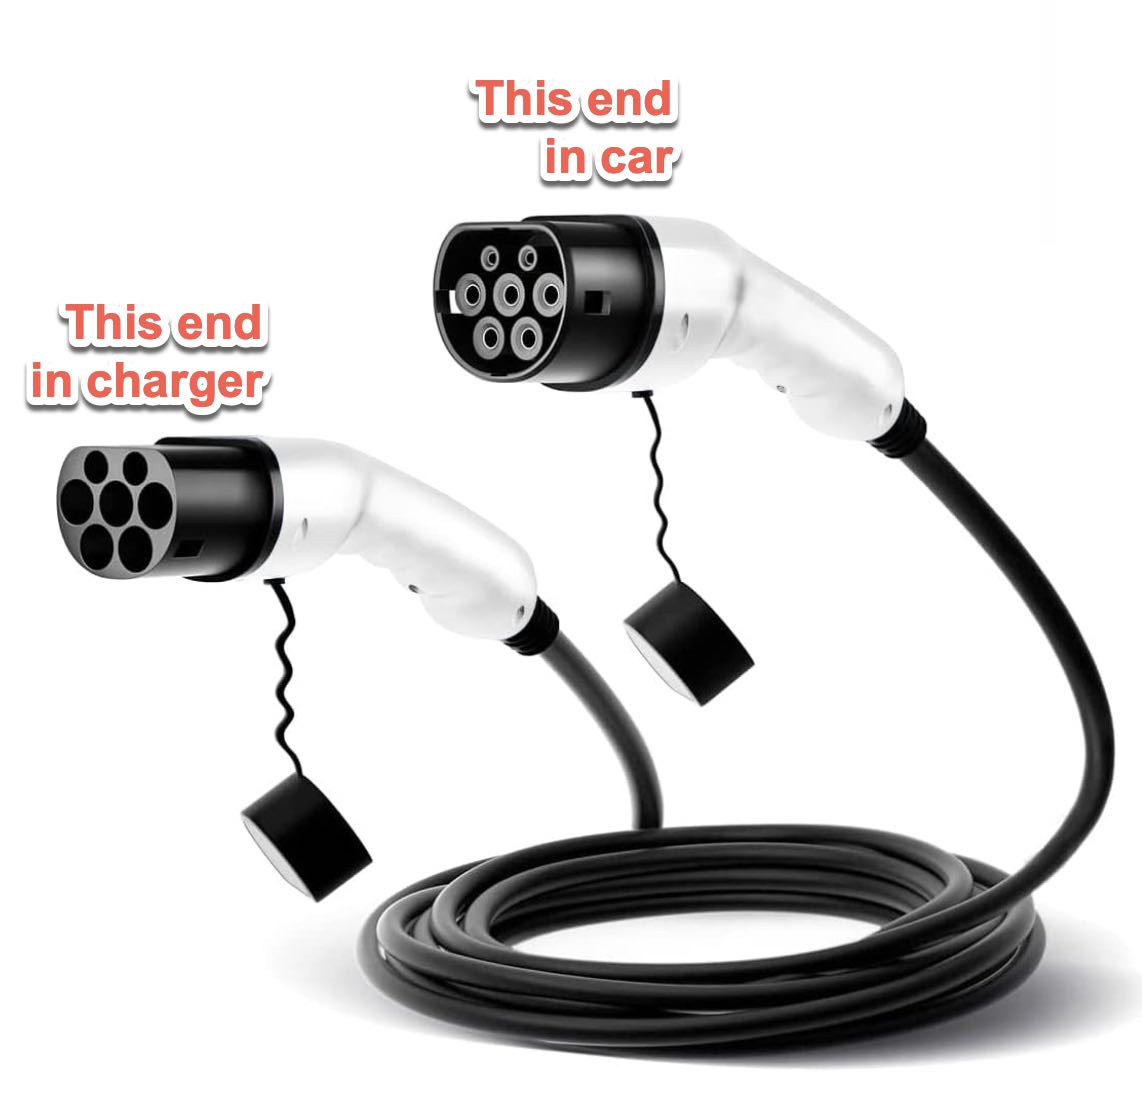 type 2 to type 2 charging cable